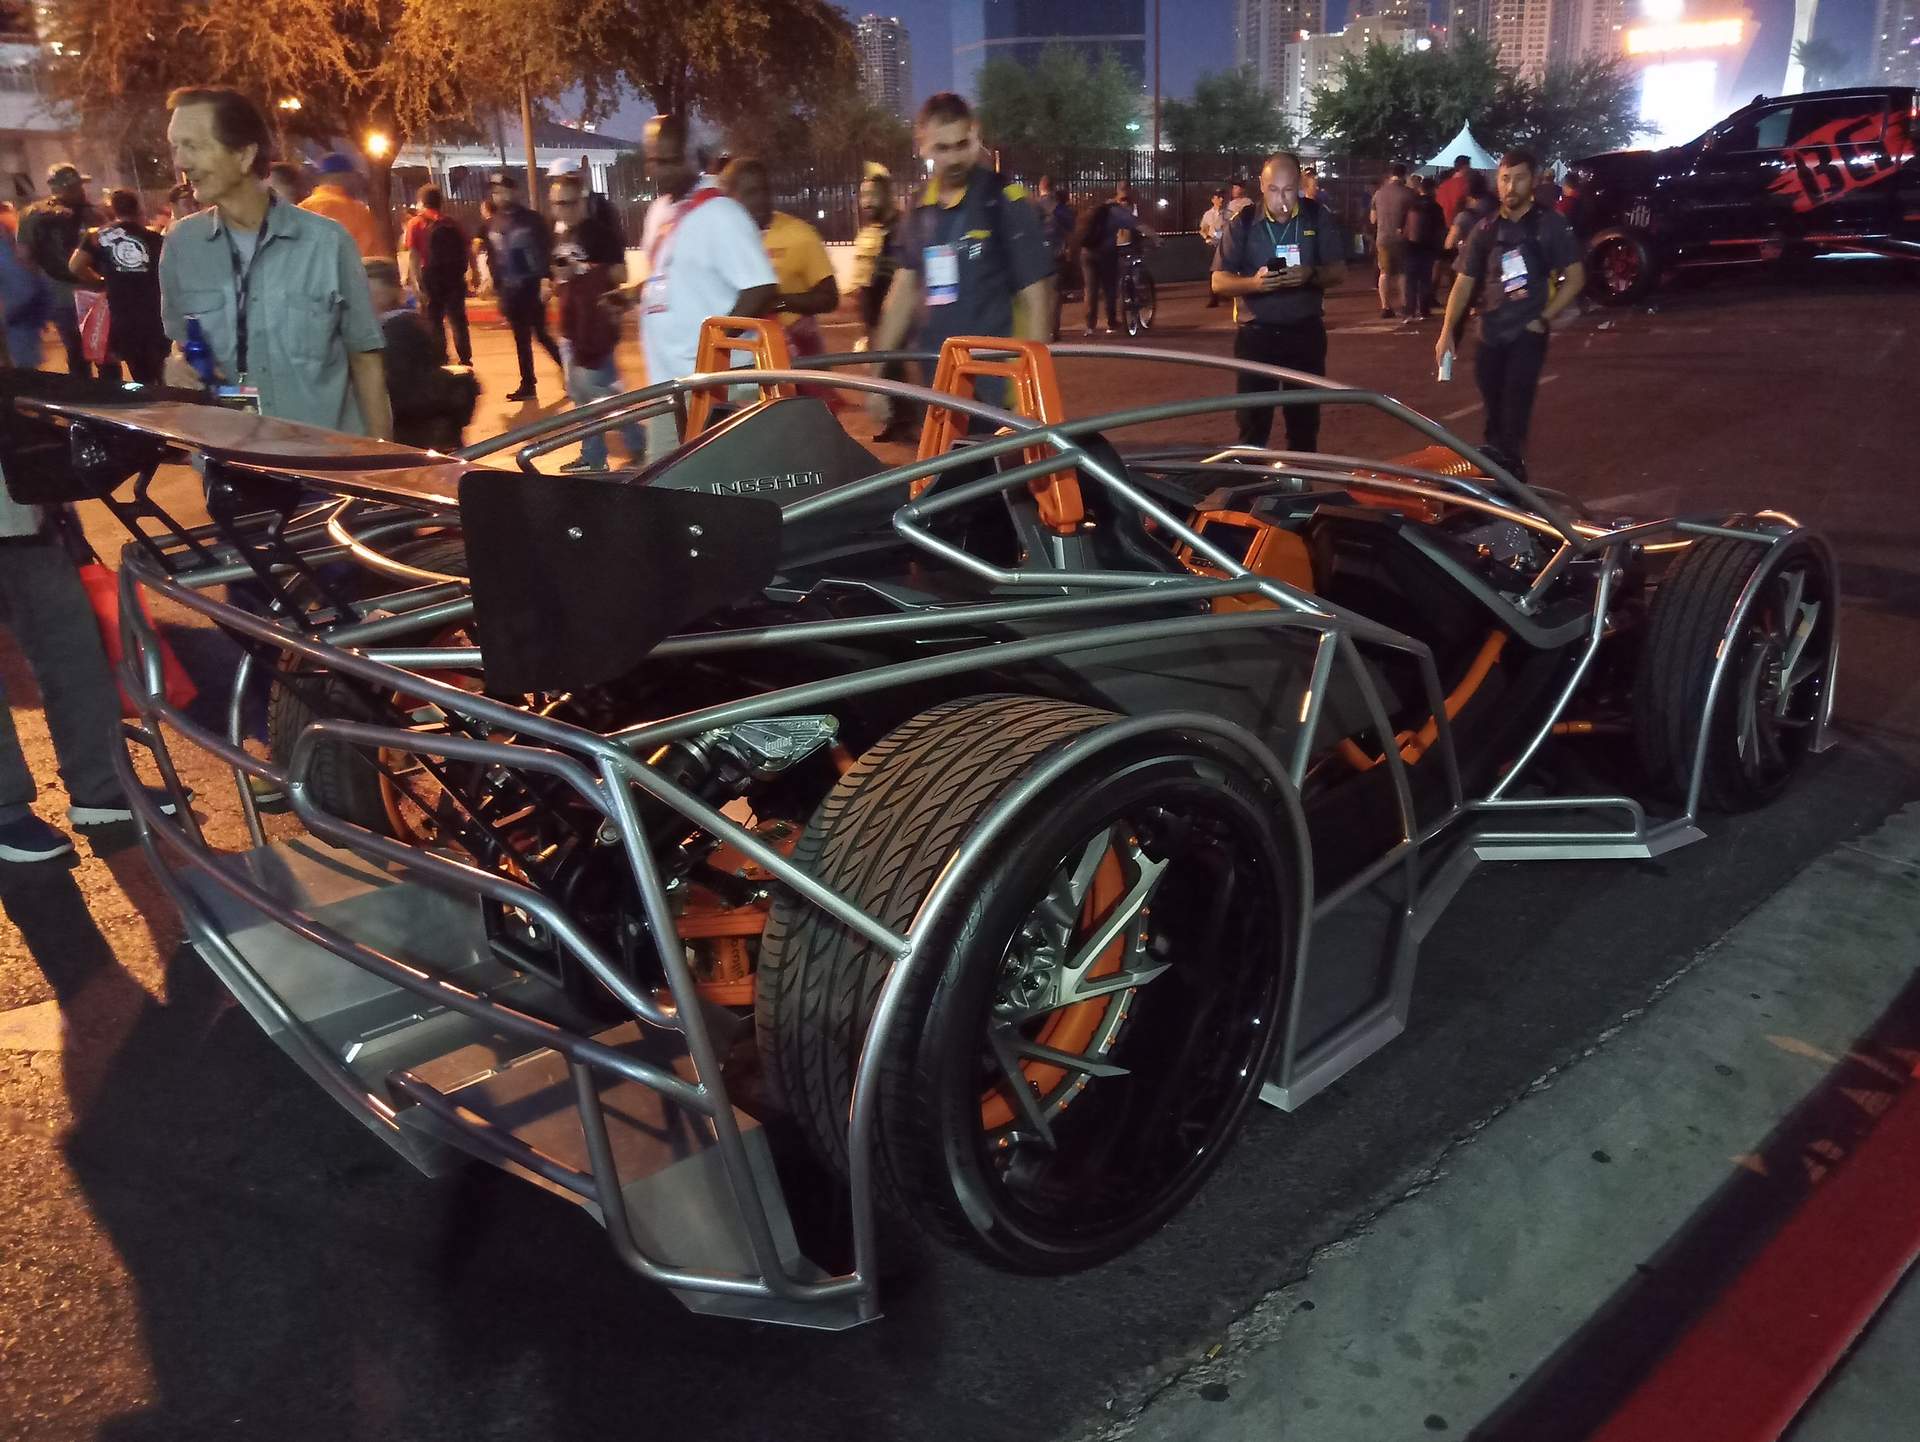 This appeared to be a highly modified Polaris Slingshot with a tube frame meant to look like a C7 Corvette.